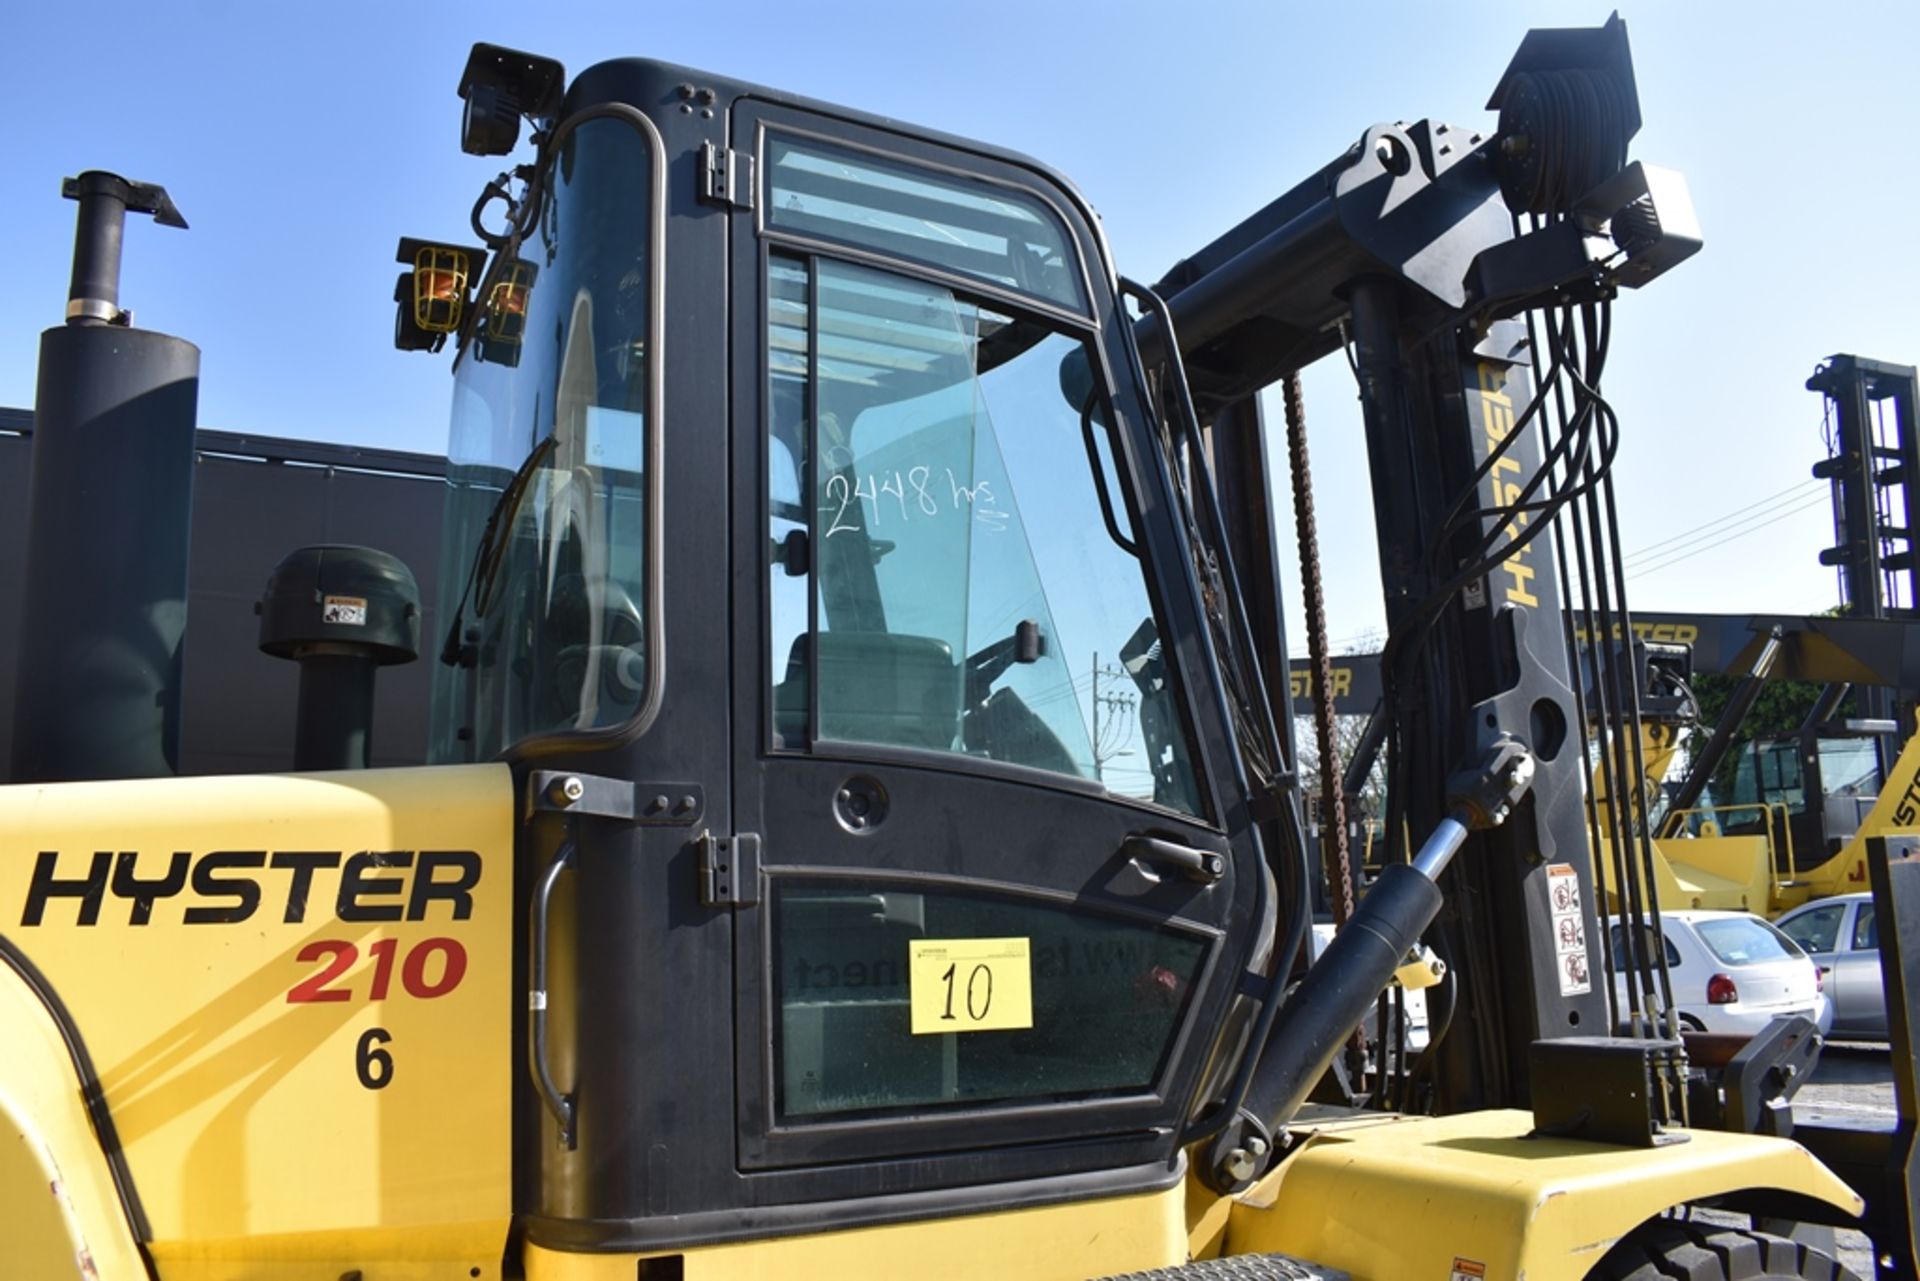 Hyster Forklift, model H210HD2, year 2017, 19,100 lb capacity, 2450 hours - Image 49 of 131